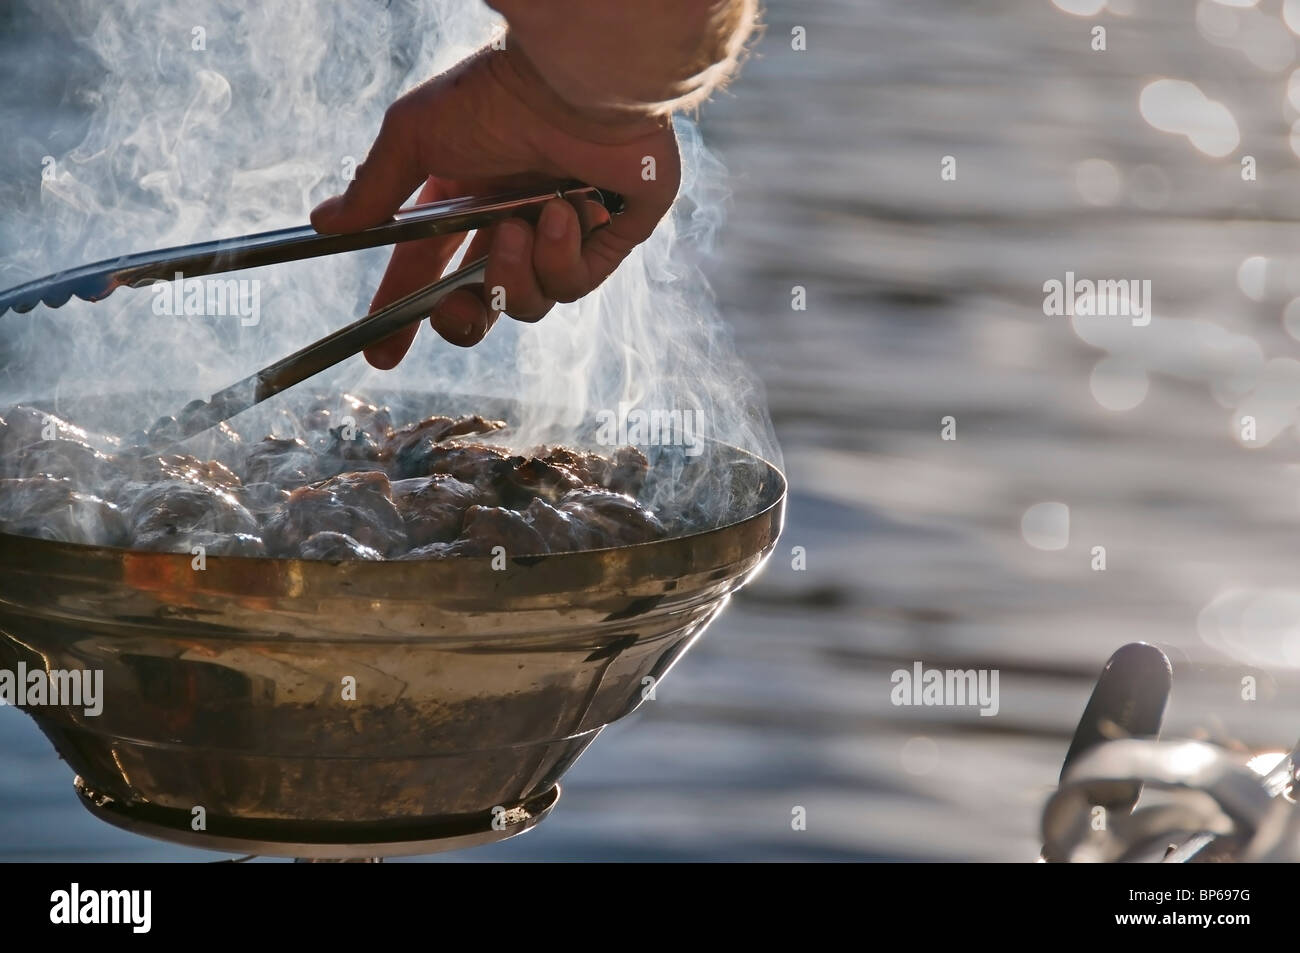 A man turns pieces of chicken with tongs over a hot barbecue grill attached to the back of a boat on the water of Puget Sound. Stock Photo